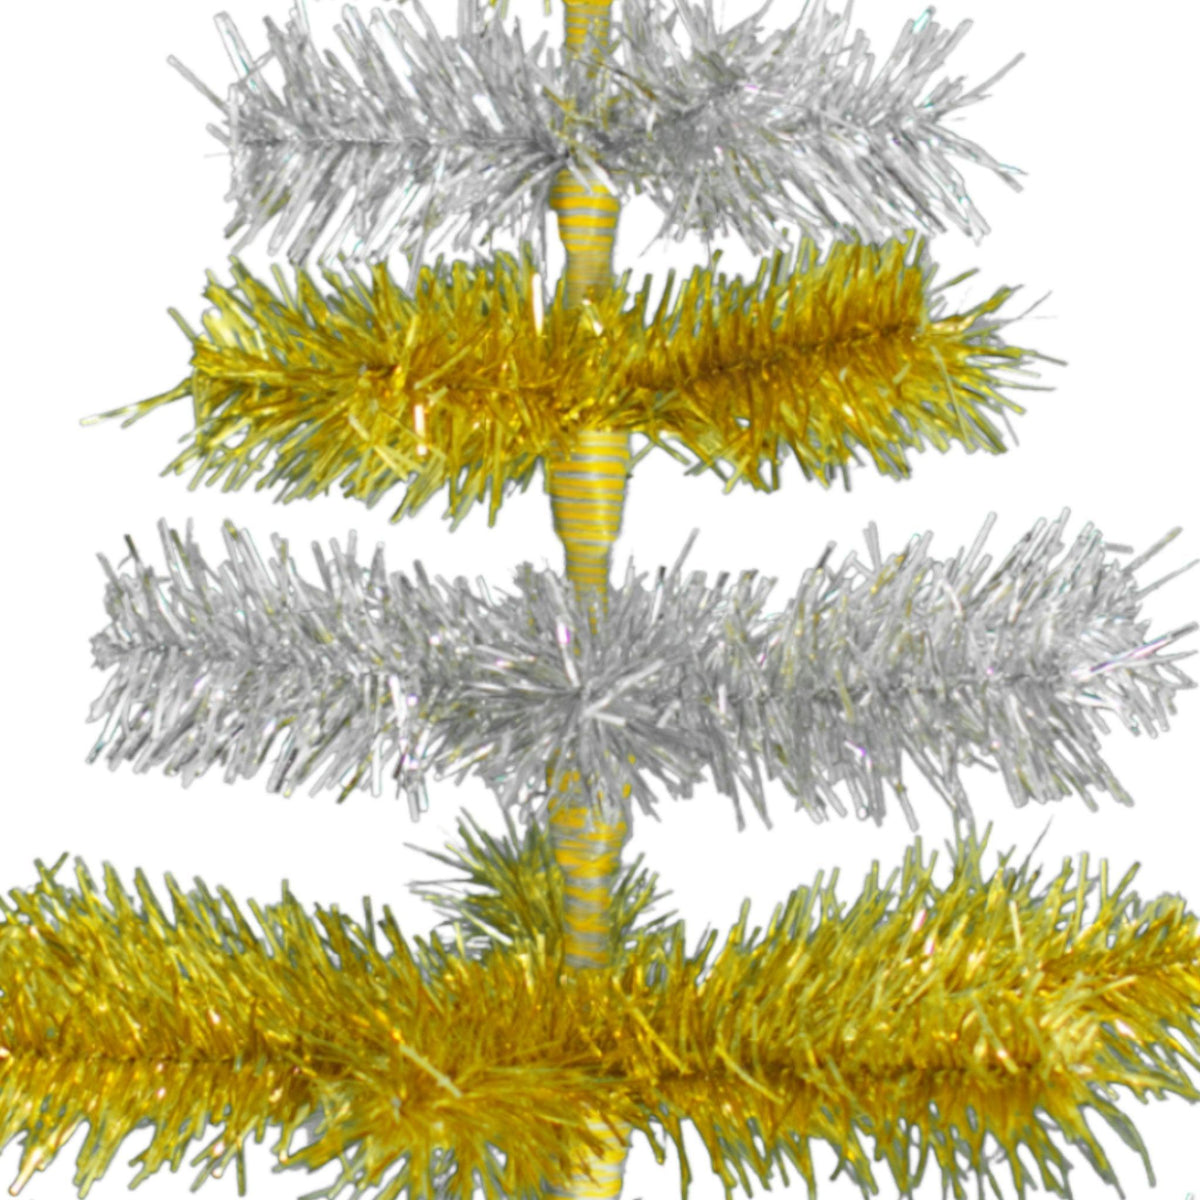 18in tall Shiny Gold and Metallic Silver Layered Tinsel Christmas Trees on sale at leedisplay.com